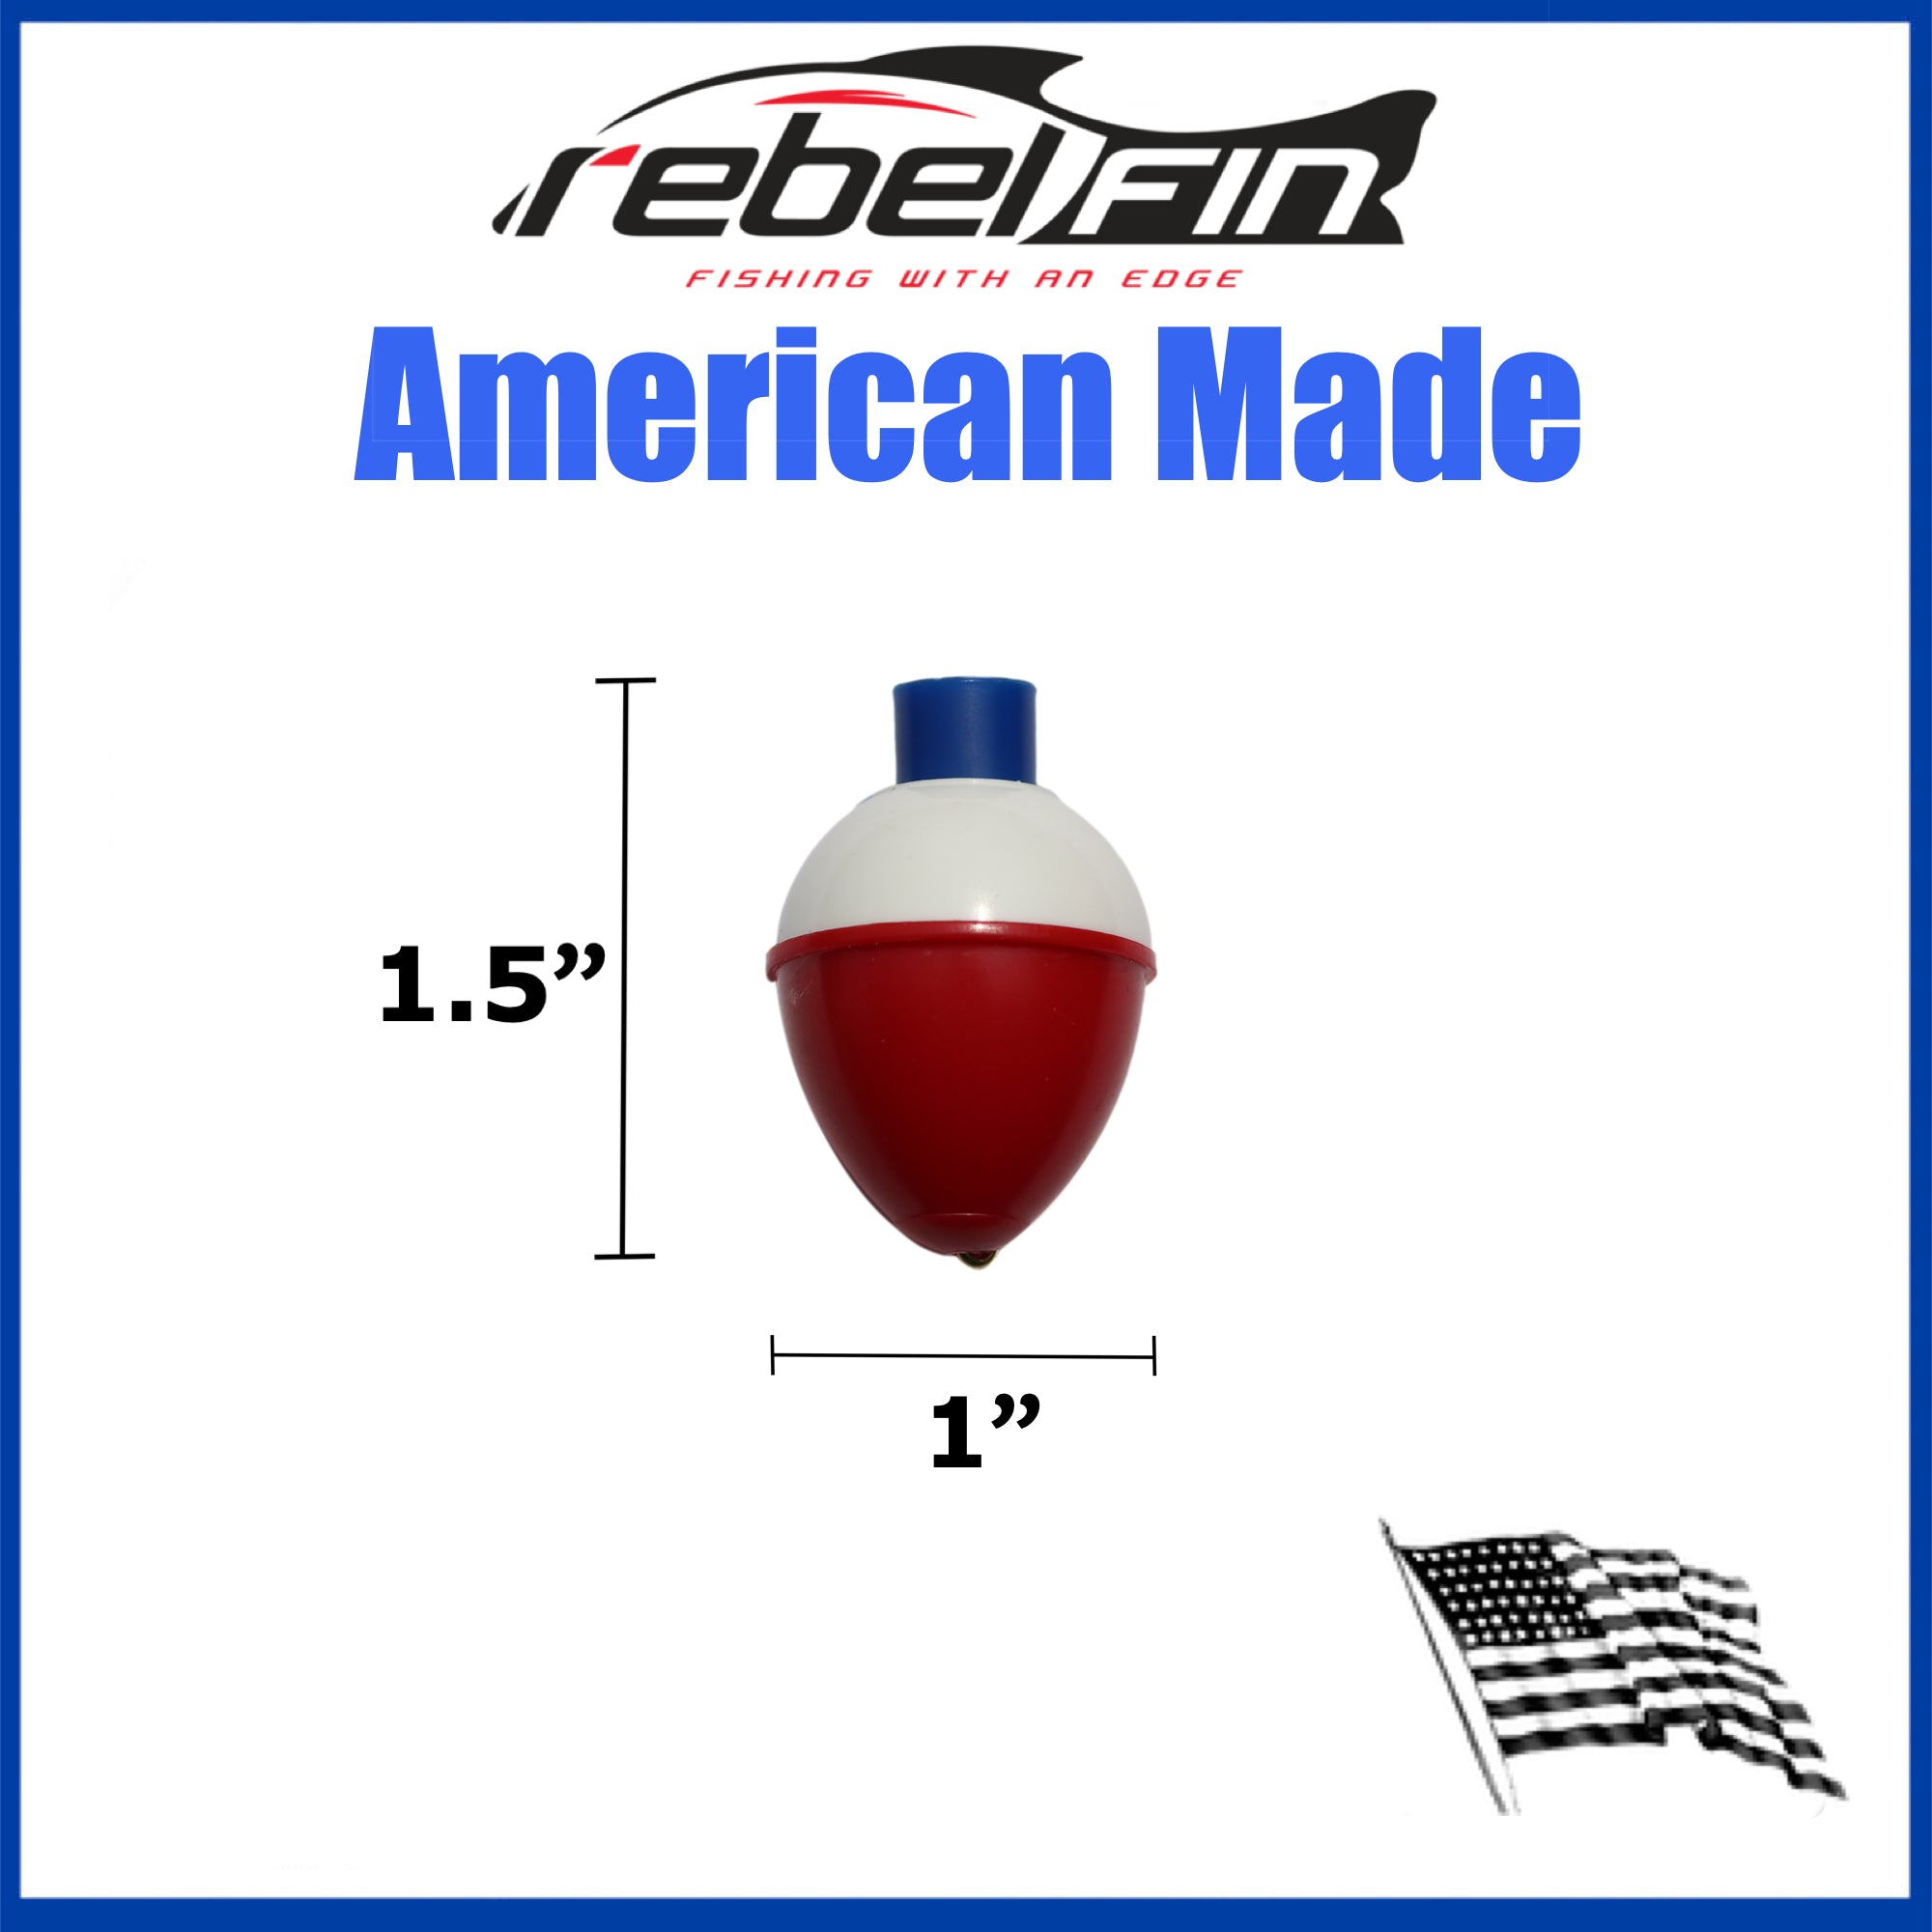 rebelFIN - 1 inch PEAR Shaped Fishing Bobbers - Made in the USA